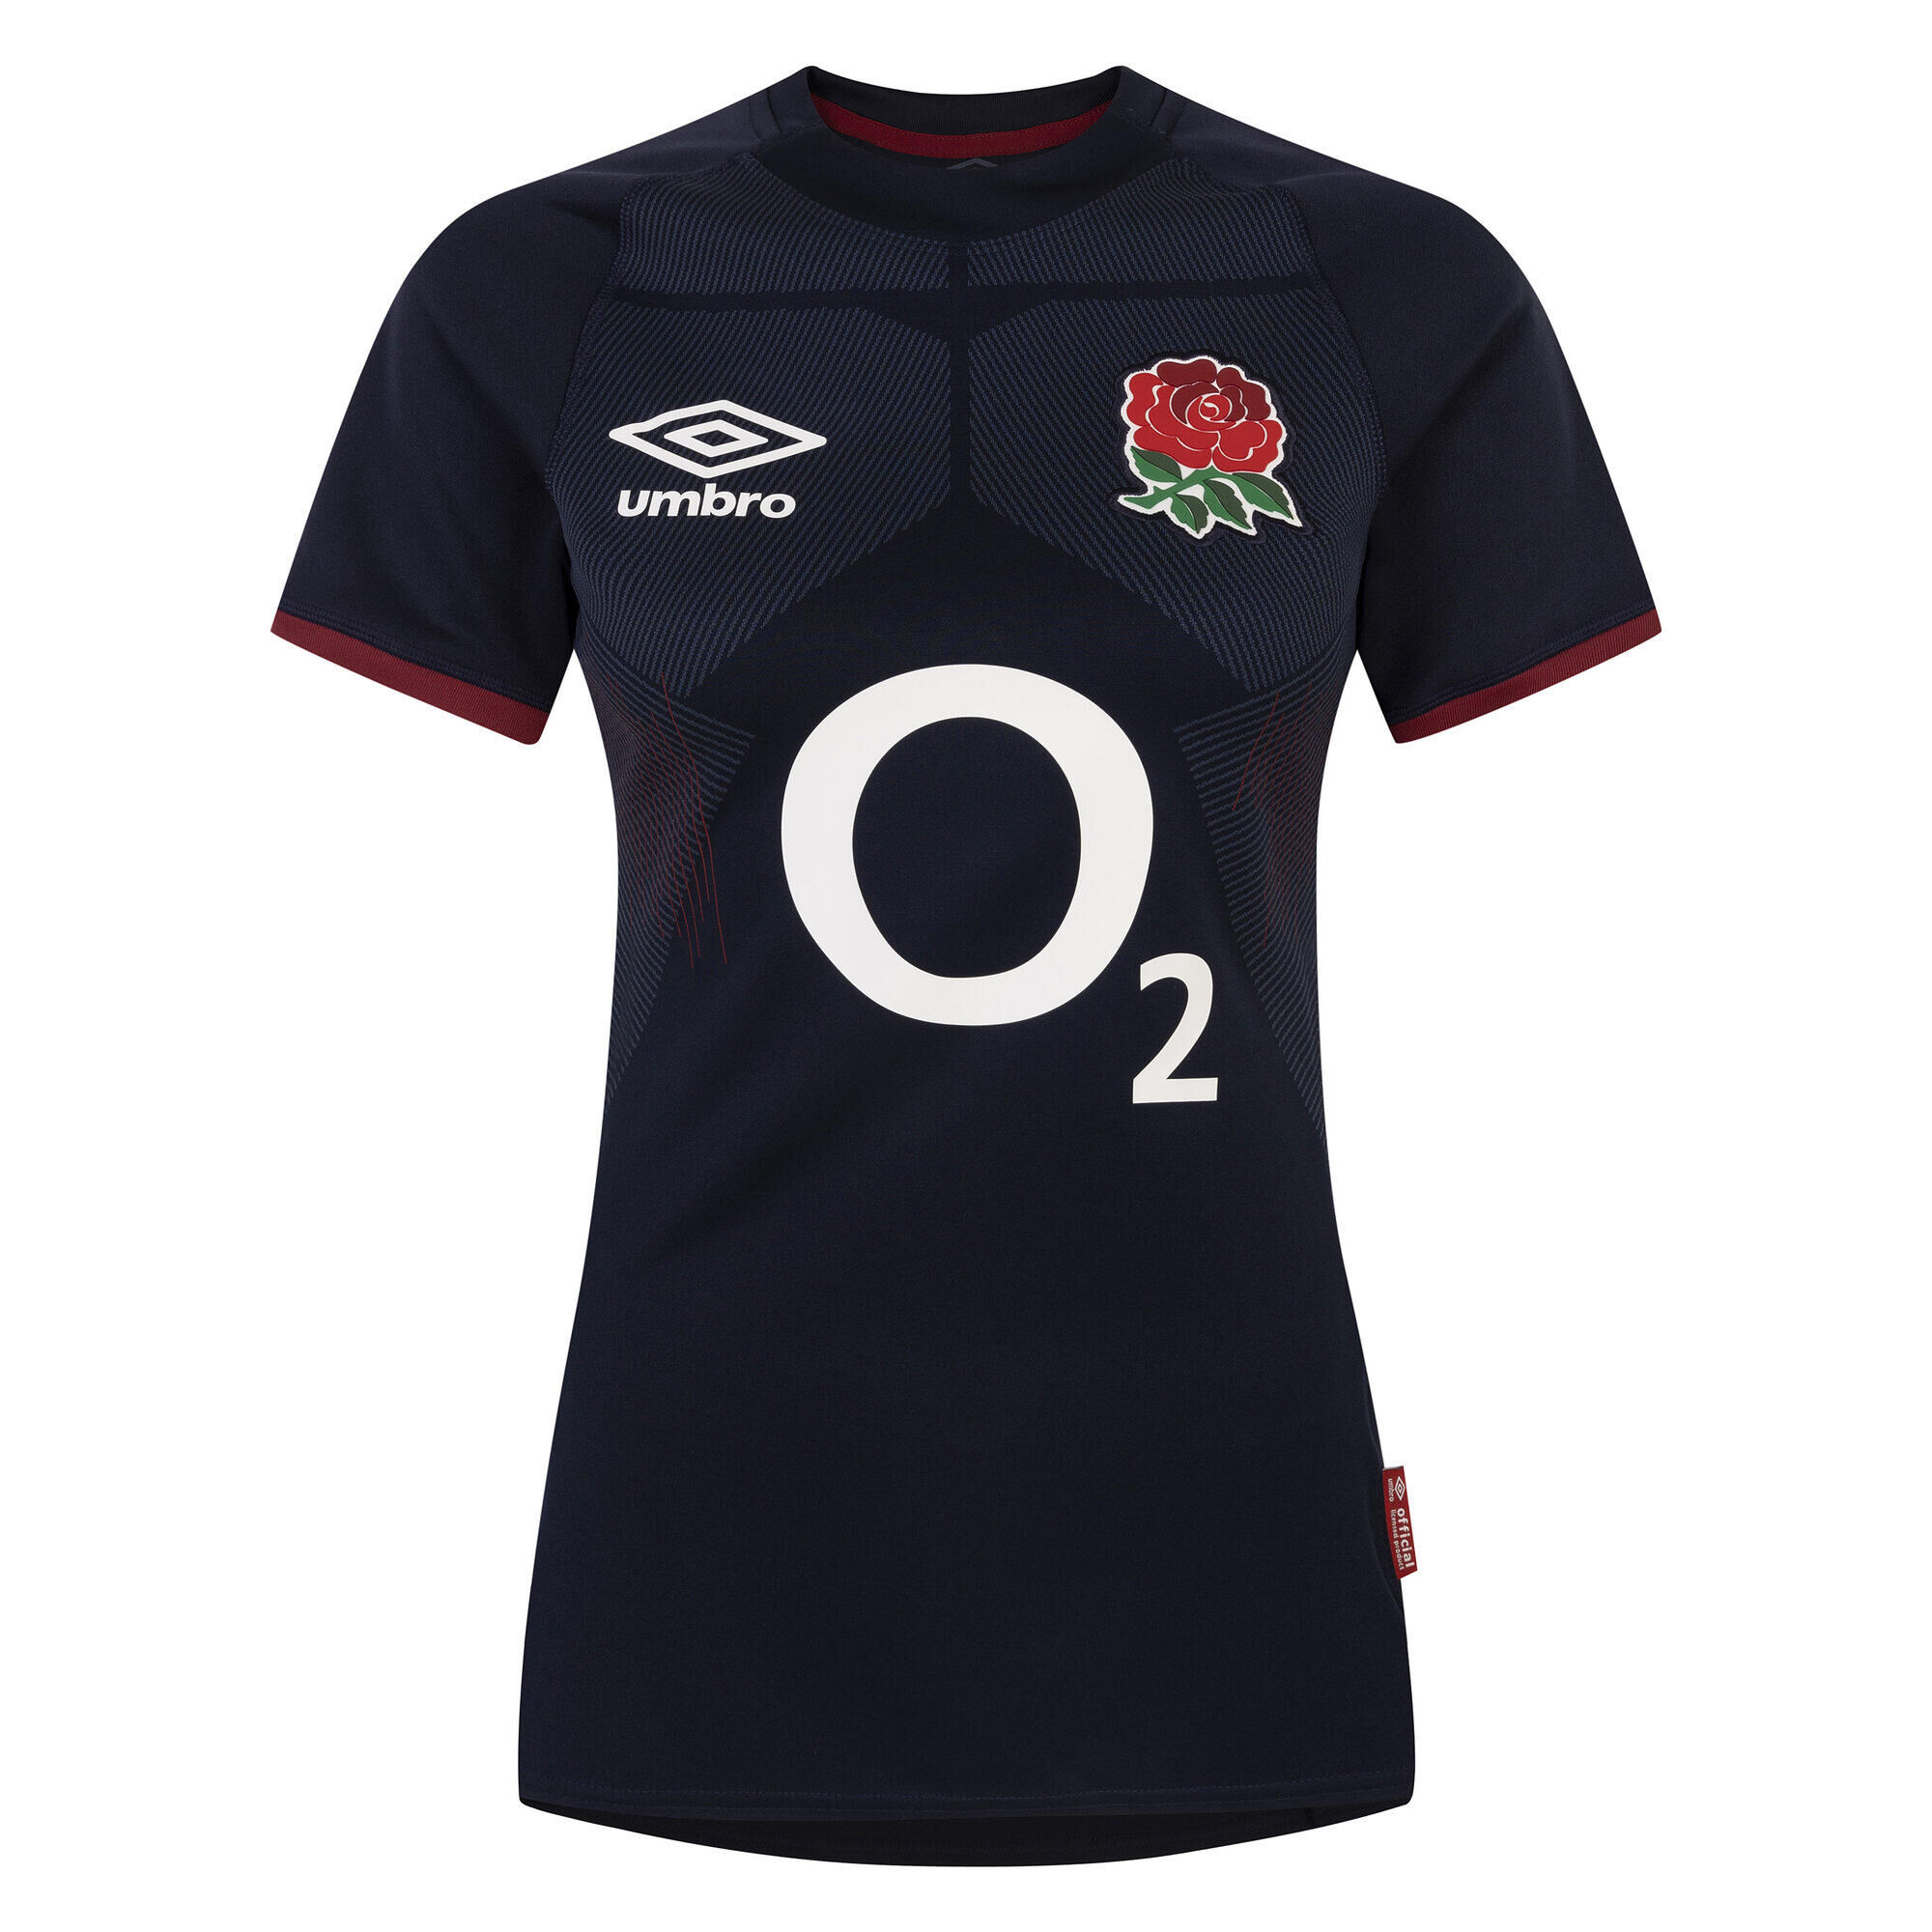 UMBRO Womens/Ladies 23/24 England Rugby Alternative Jersey (Navy Blue/White/Red)